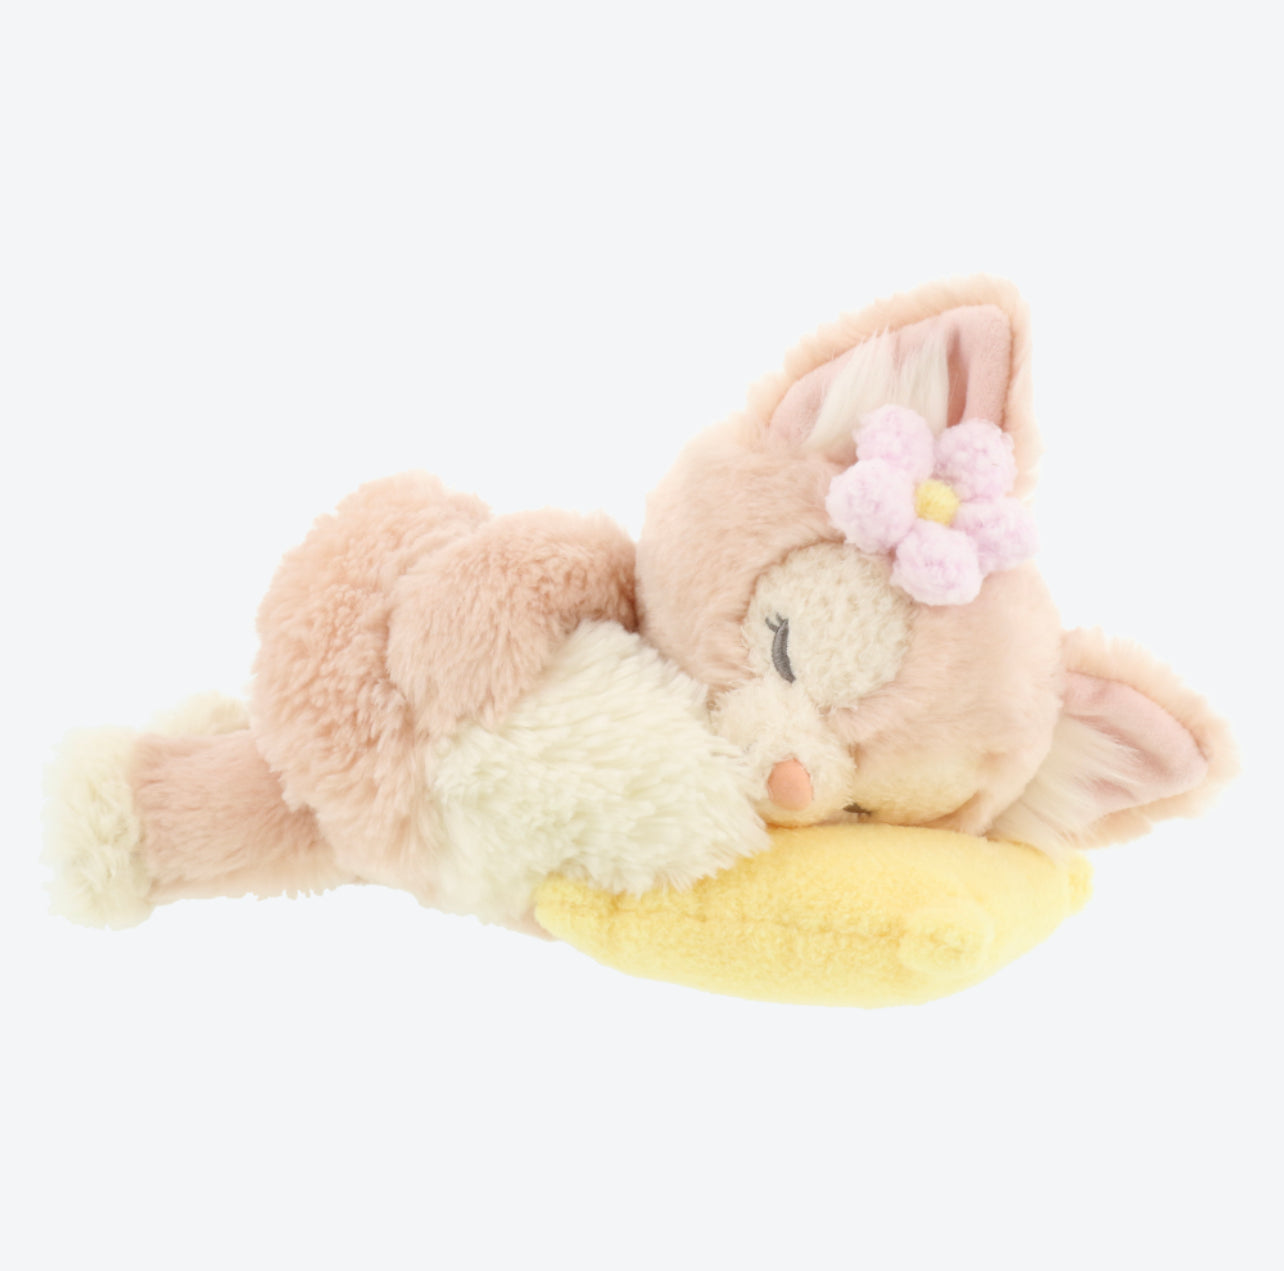 TDR - Duffy's Sweet Dreams - Plush Toy x Sleeping LinaBell (Release Date: Oct 2)